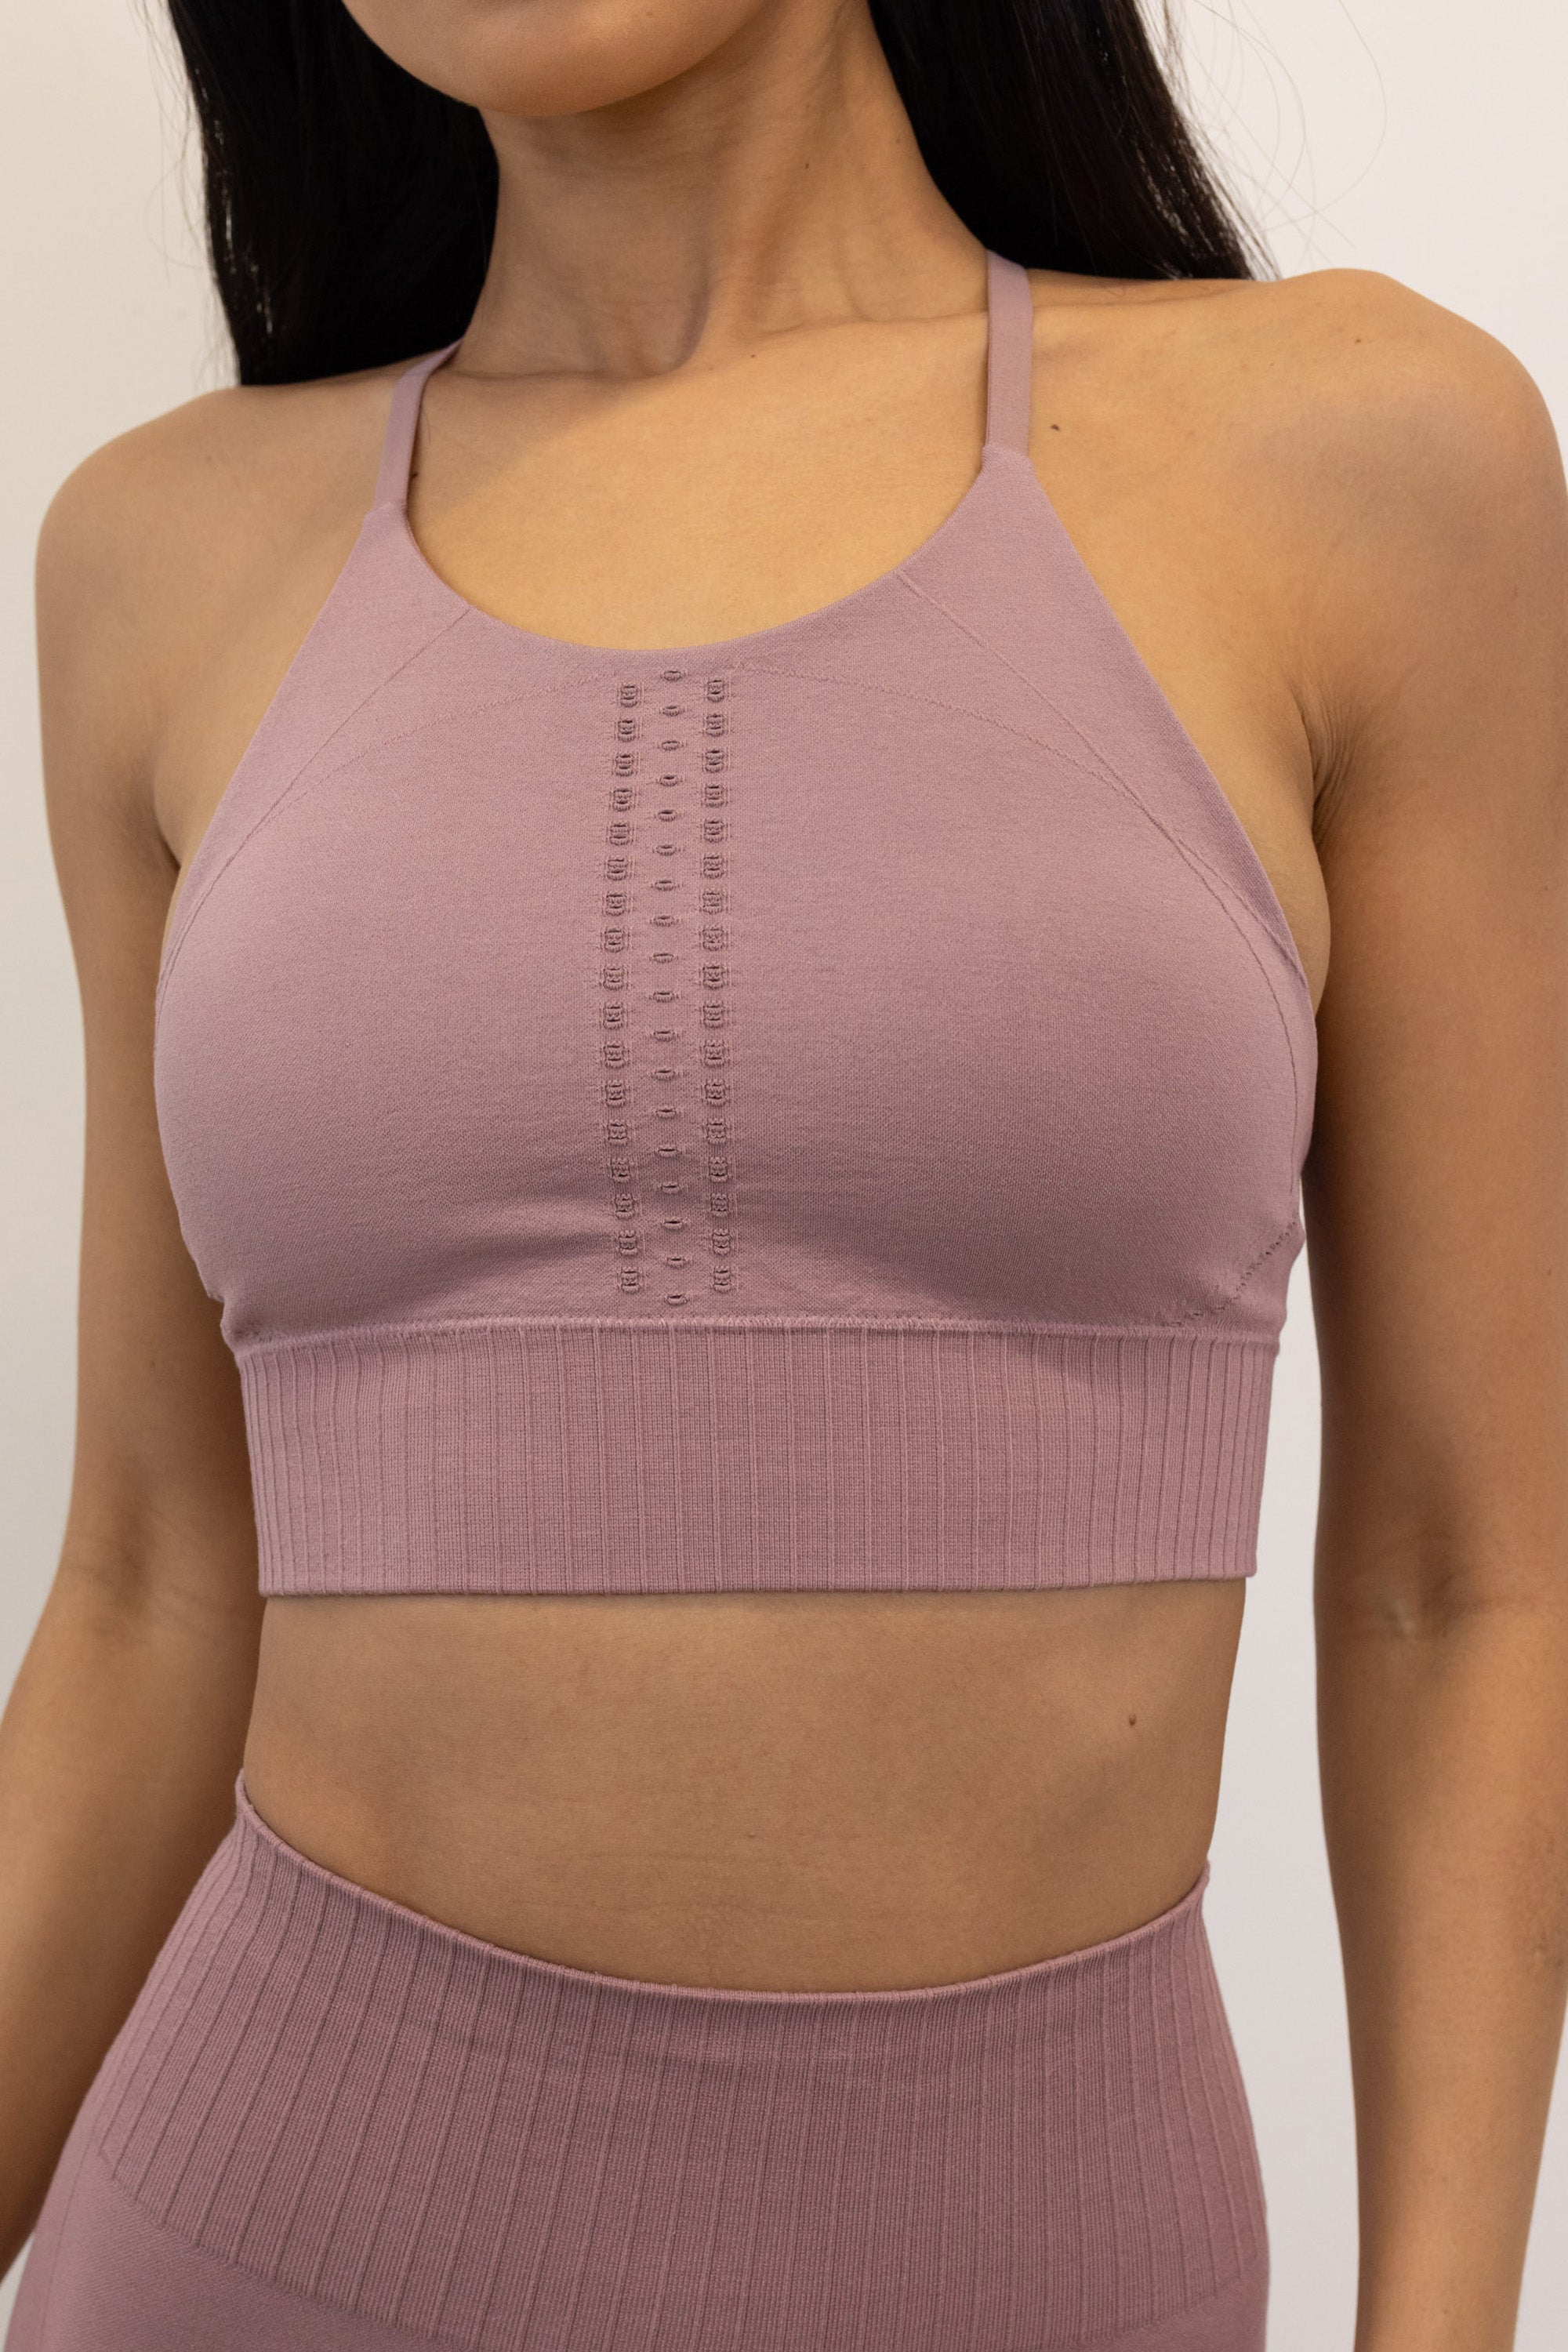 Dusky dusty pink purple long line high neck sports bra top with adjustable straps and removable padding from seamless recycled fabric for yoga, pilates, barre, gym and exercise by sustainable activewear brand Jilla Active 